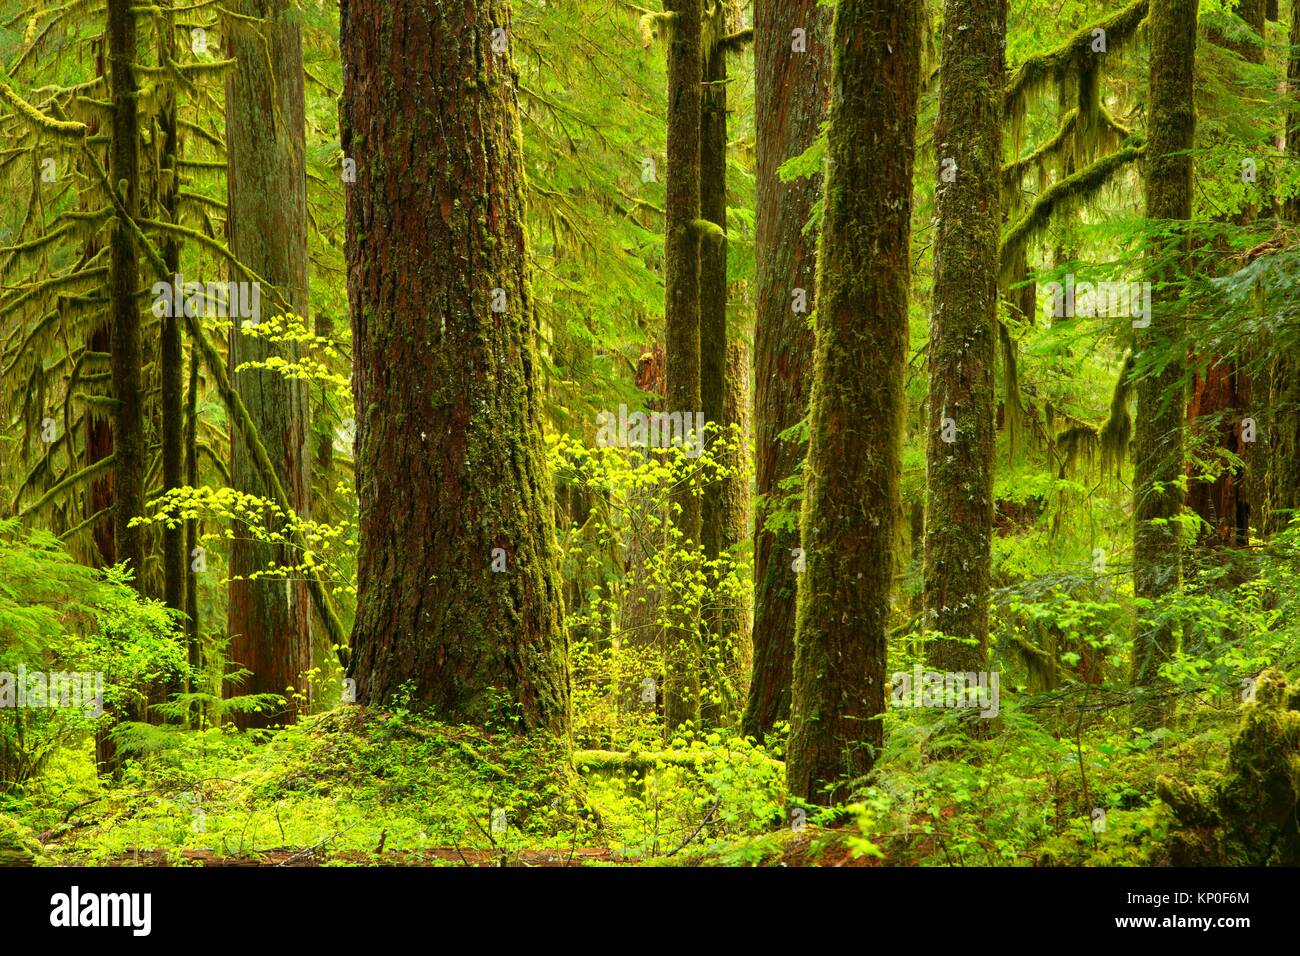 Ancient forest along Opal Creek Trail, Opal Creek Scenic Recreation Area, Willamette National Forest, Oregon. Stock Photo